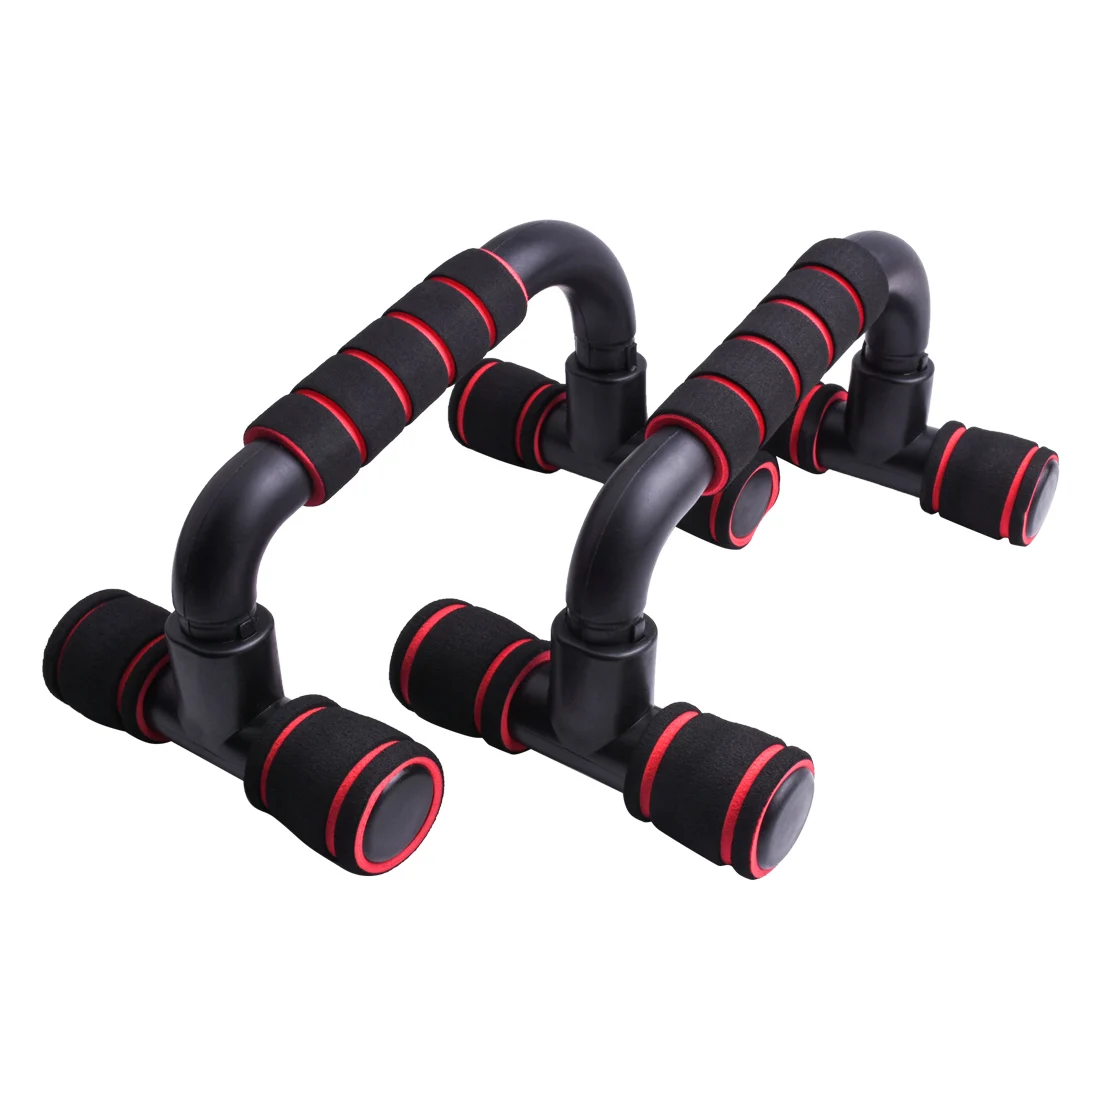 

Push-up Bars Home Fitness Exercise Stands Workout Gym Rack Equipment Set Muscle Chest Arms Strength Training Board Bodybuilding